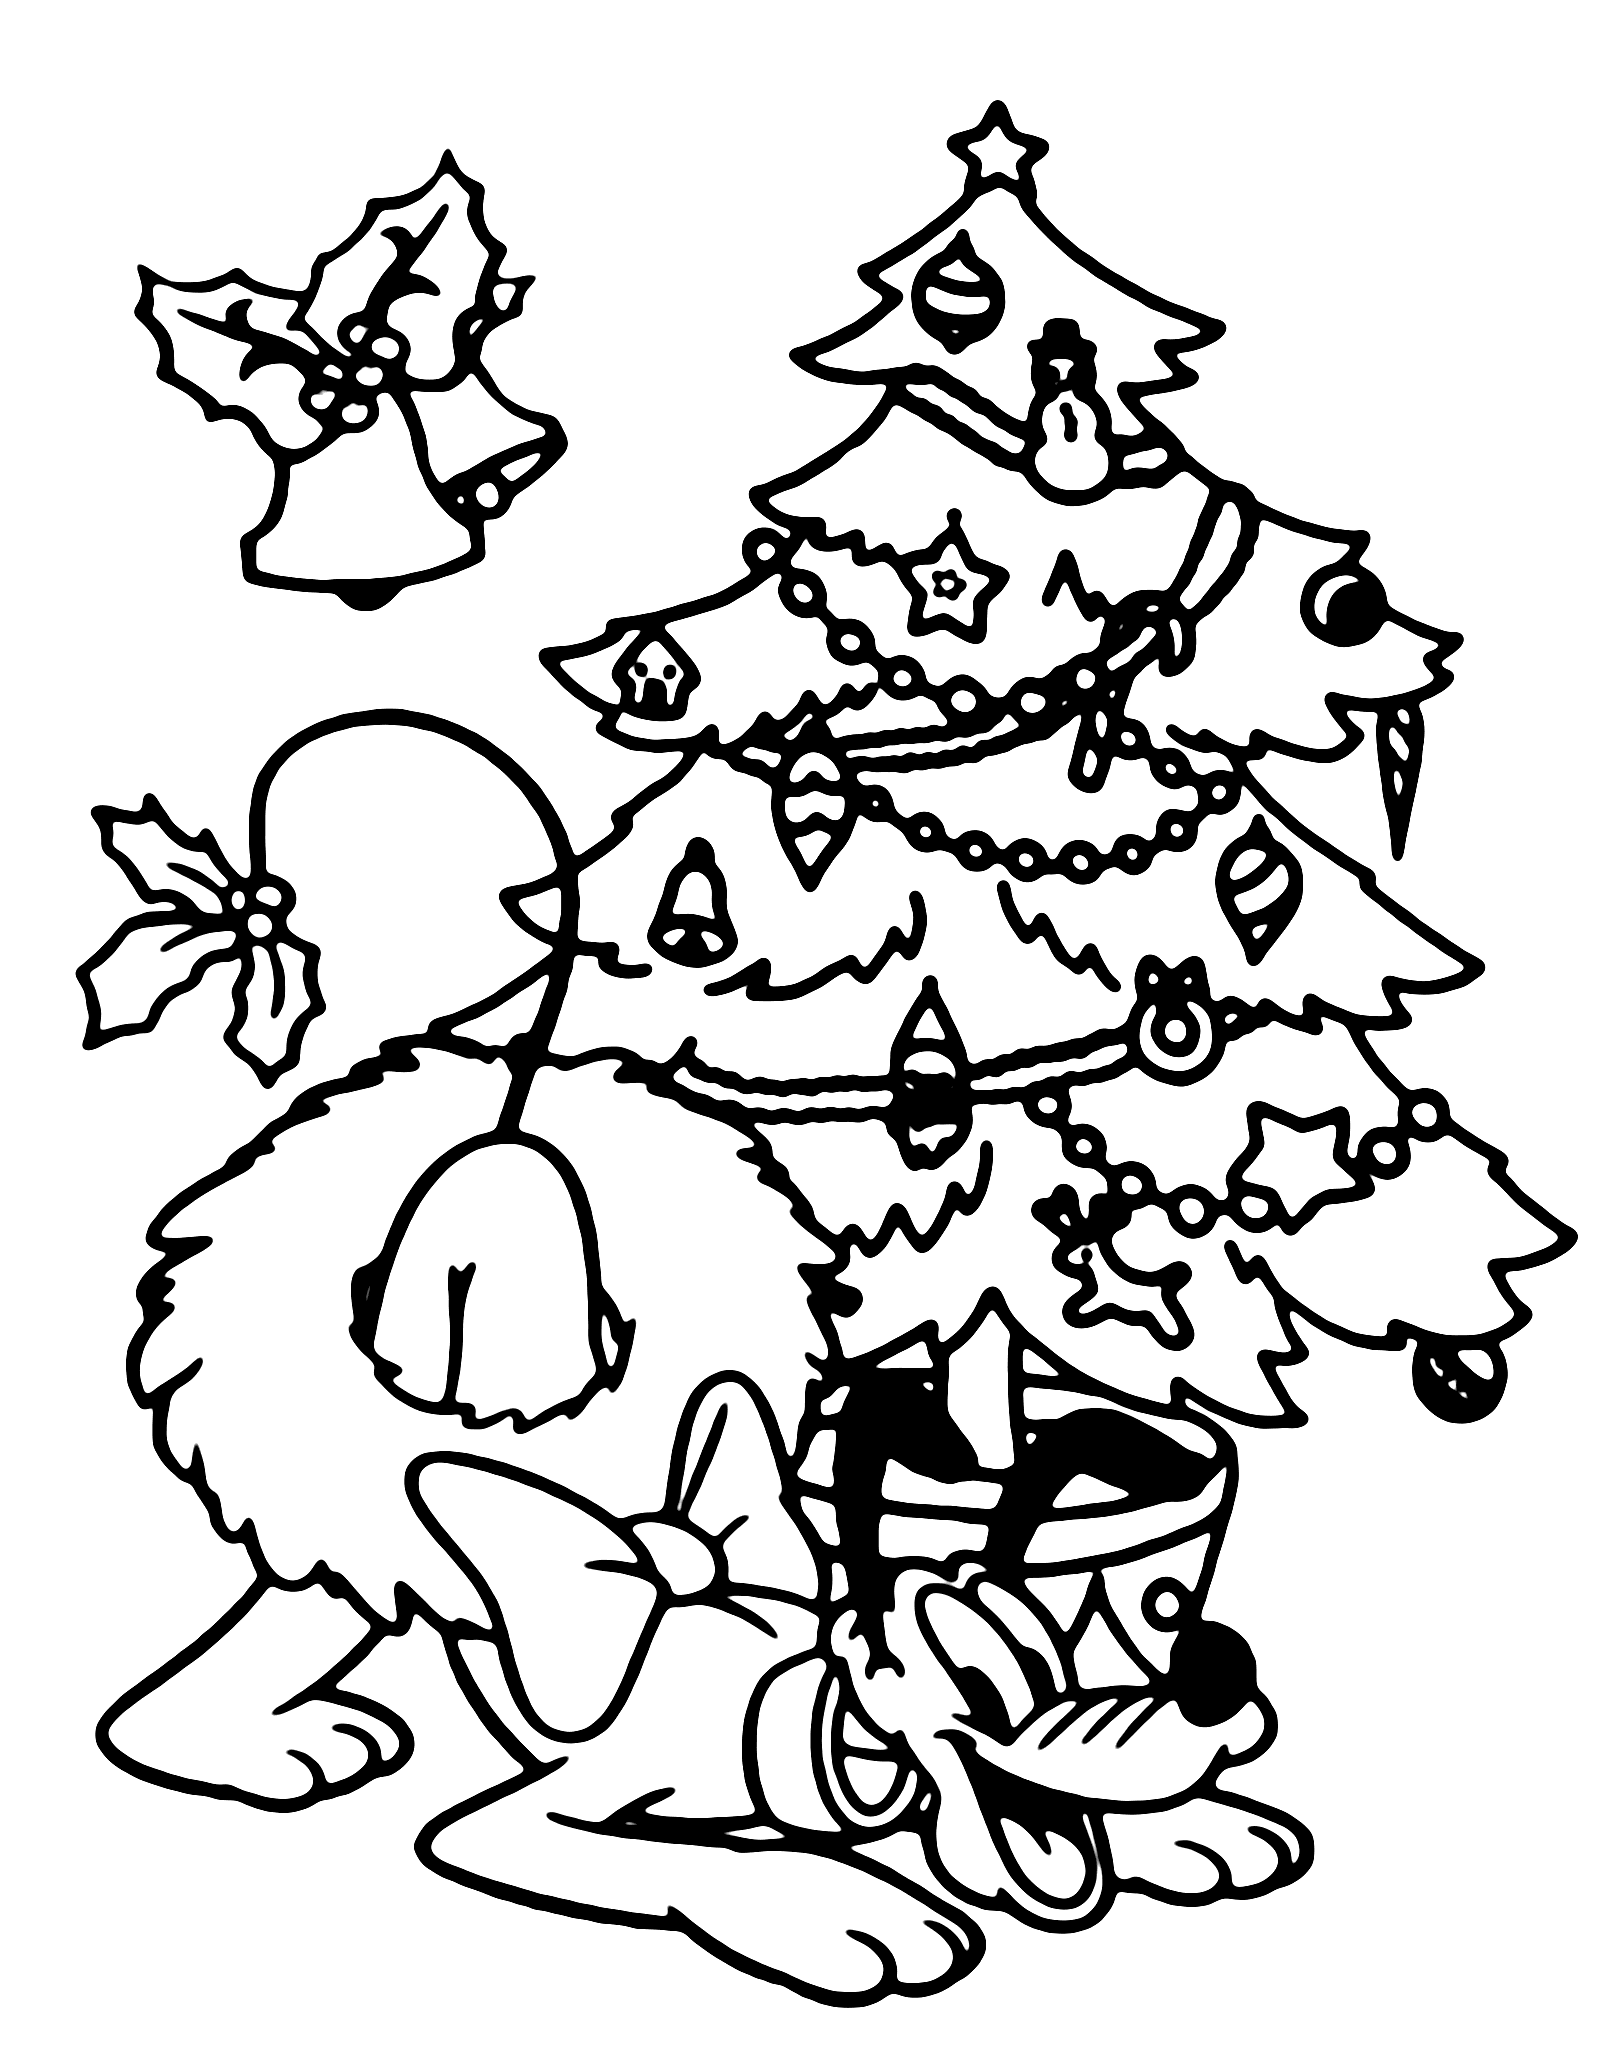 Merry Christmas Pluto's Christmas Celebration Coloring Page